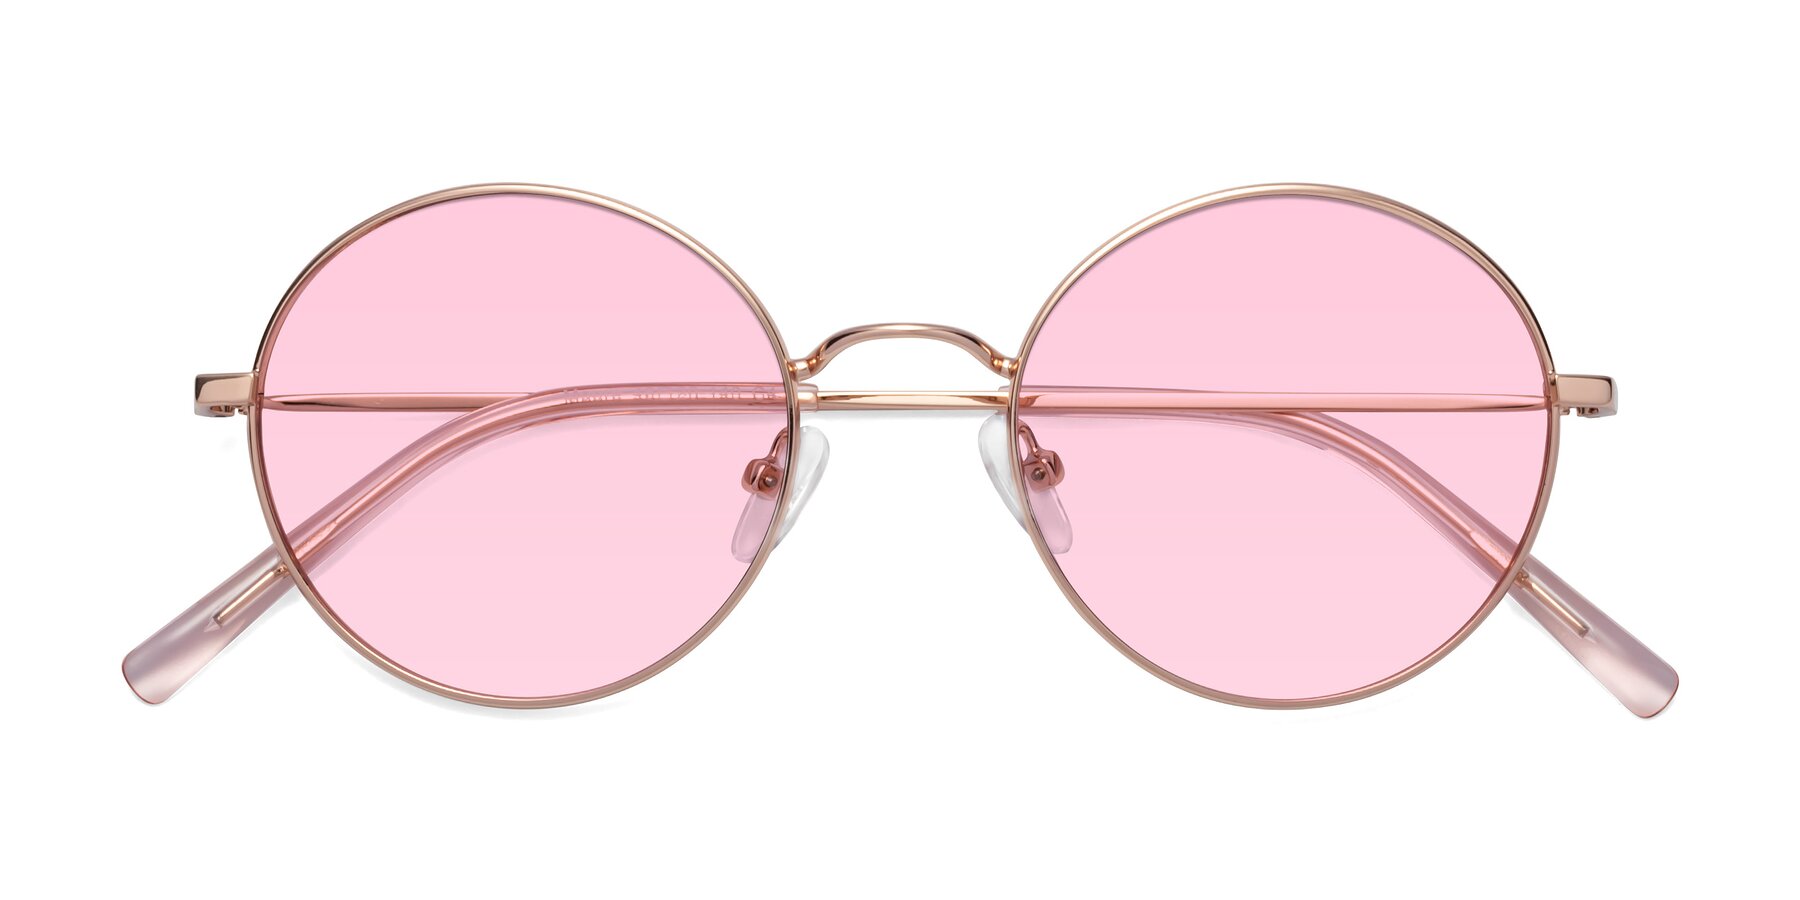 Rose Gold Retro-Vintage Metal Round Tinted Sunglasses with Light ...